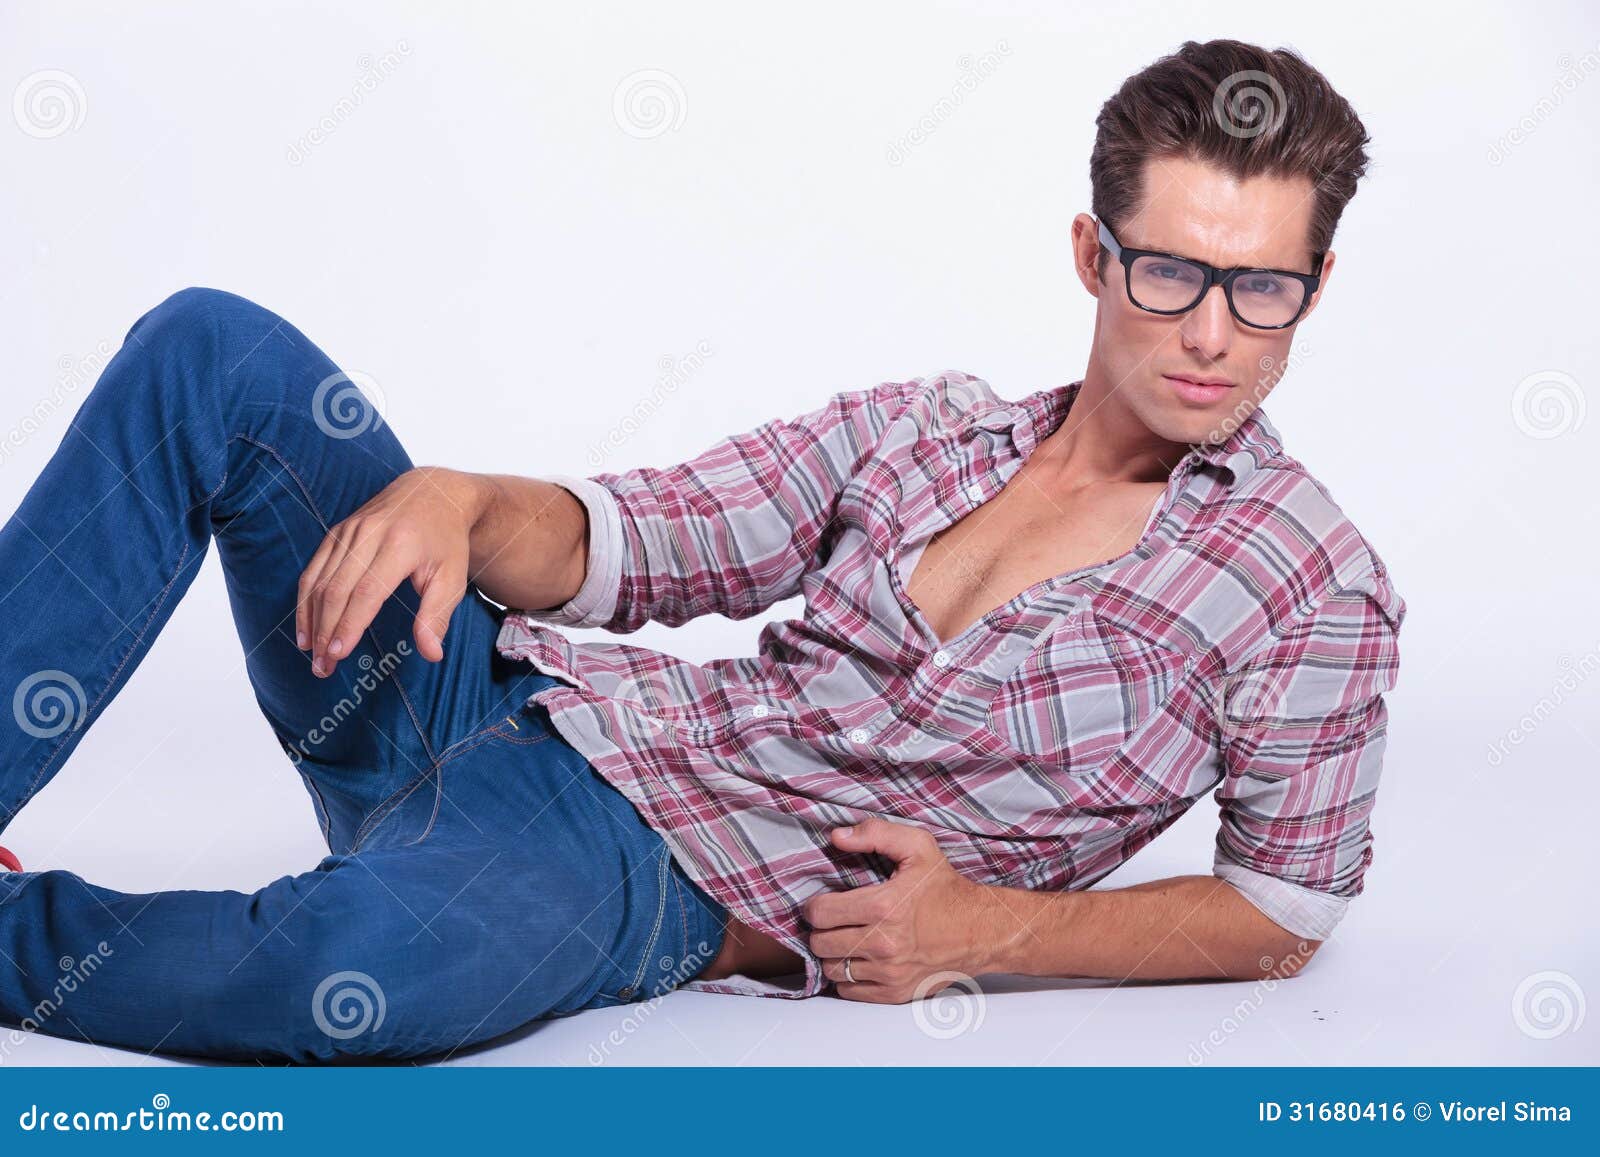 28 Greatest Male Model Poses For Casual Cool Photoshoots - LedomStyle